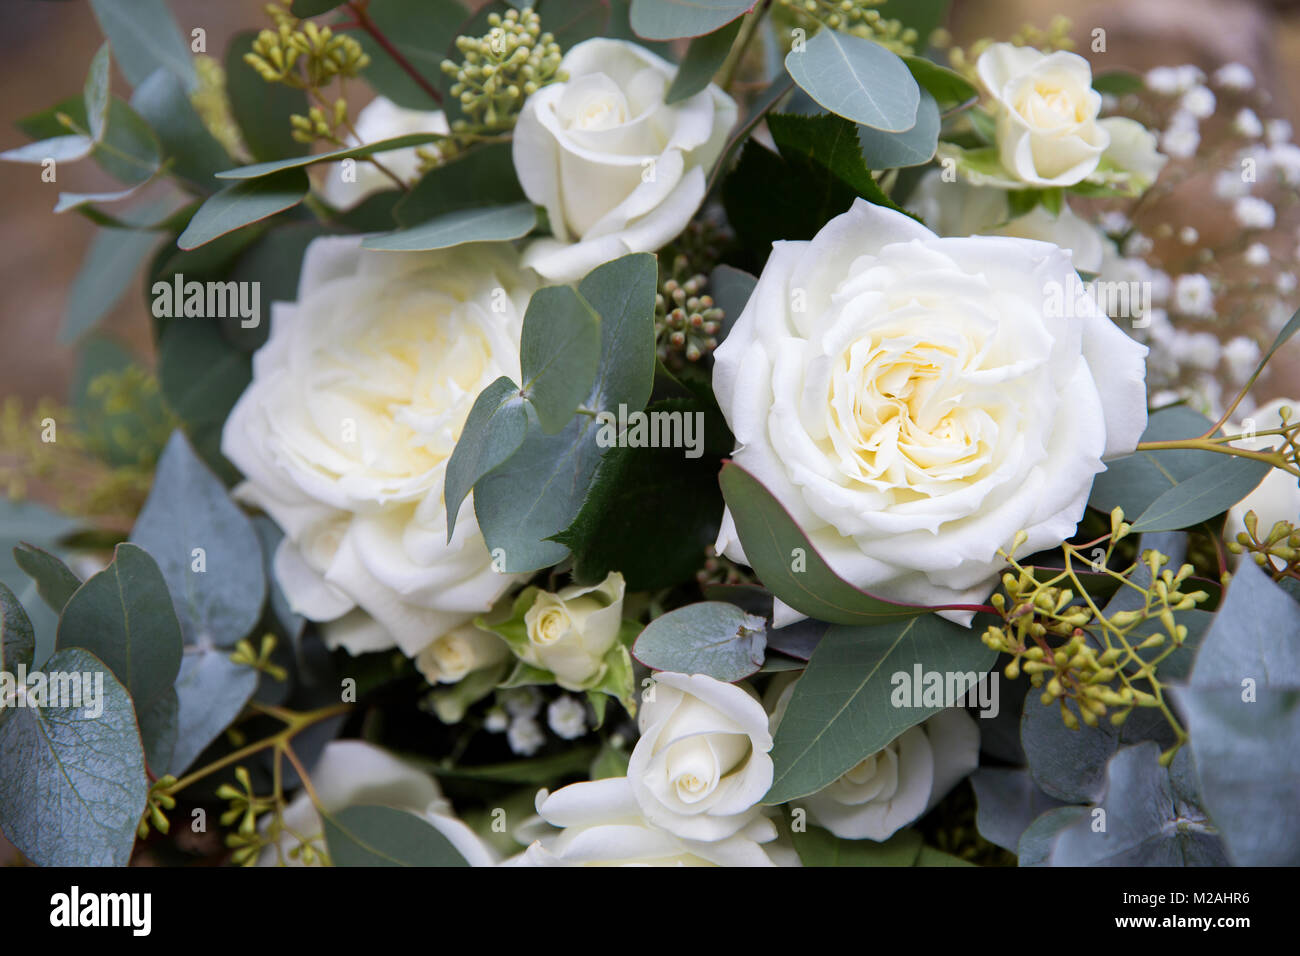 Floral arrangement with white roses, close-up Stock Photo